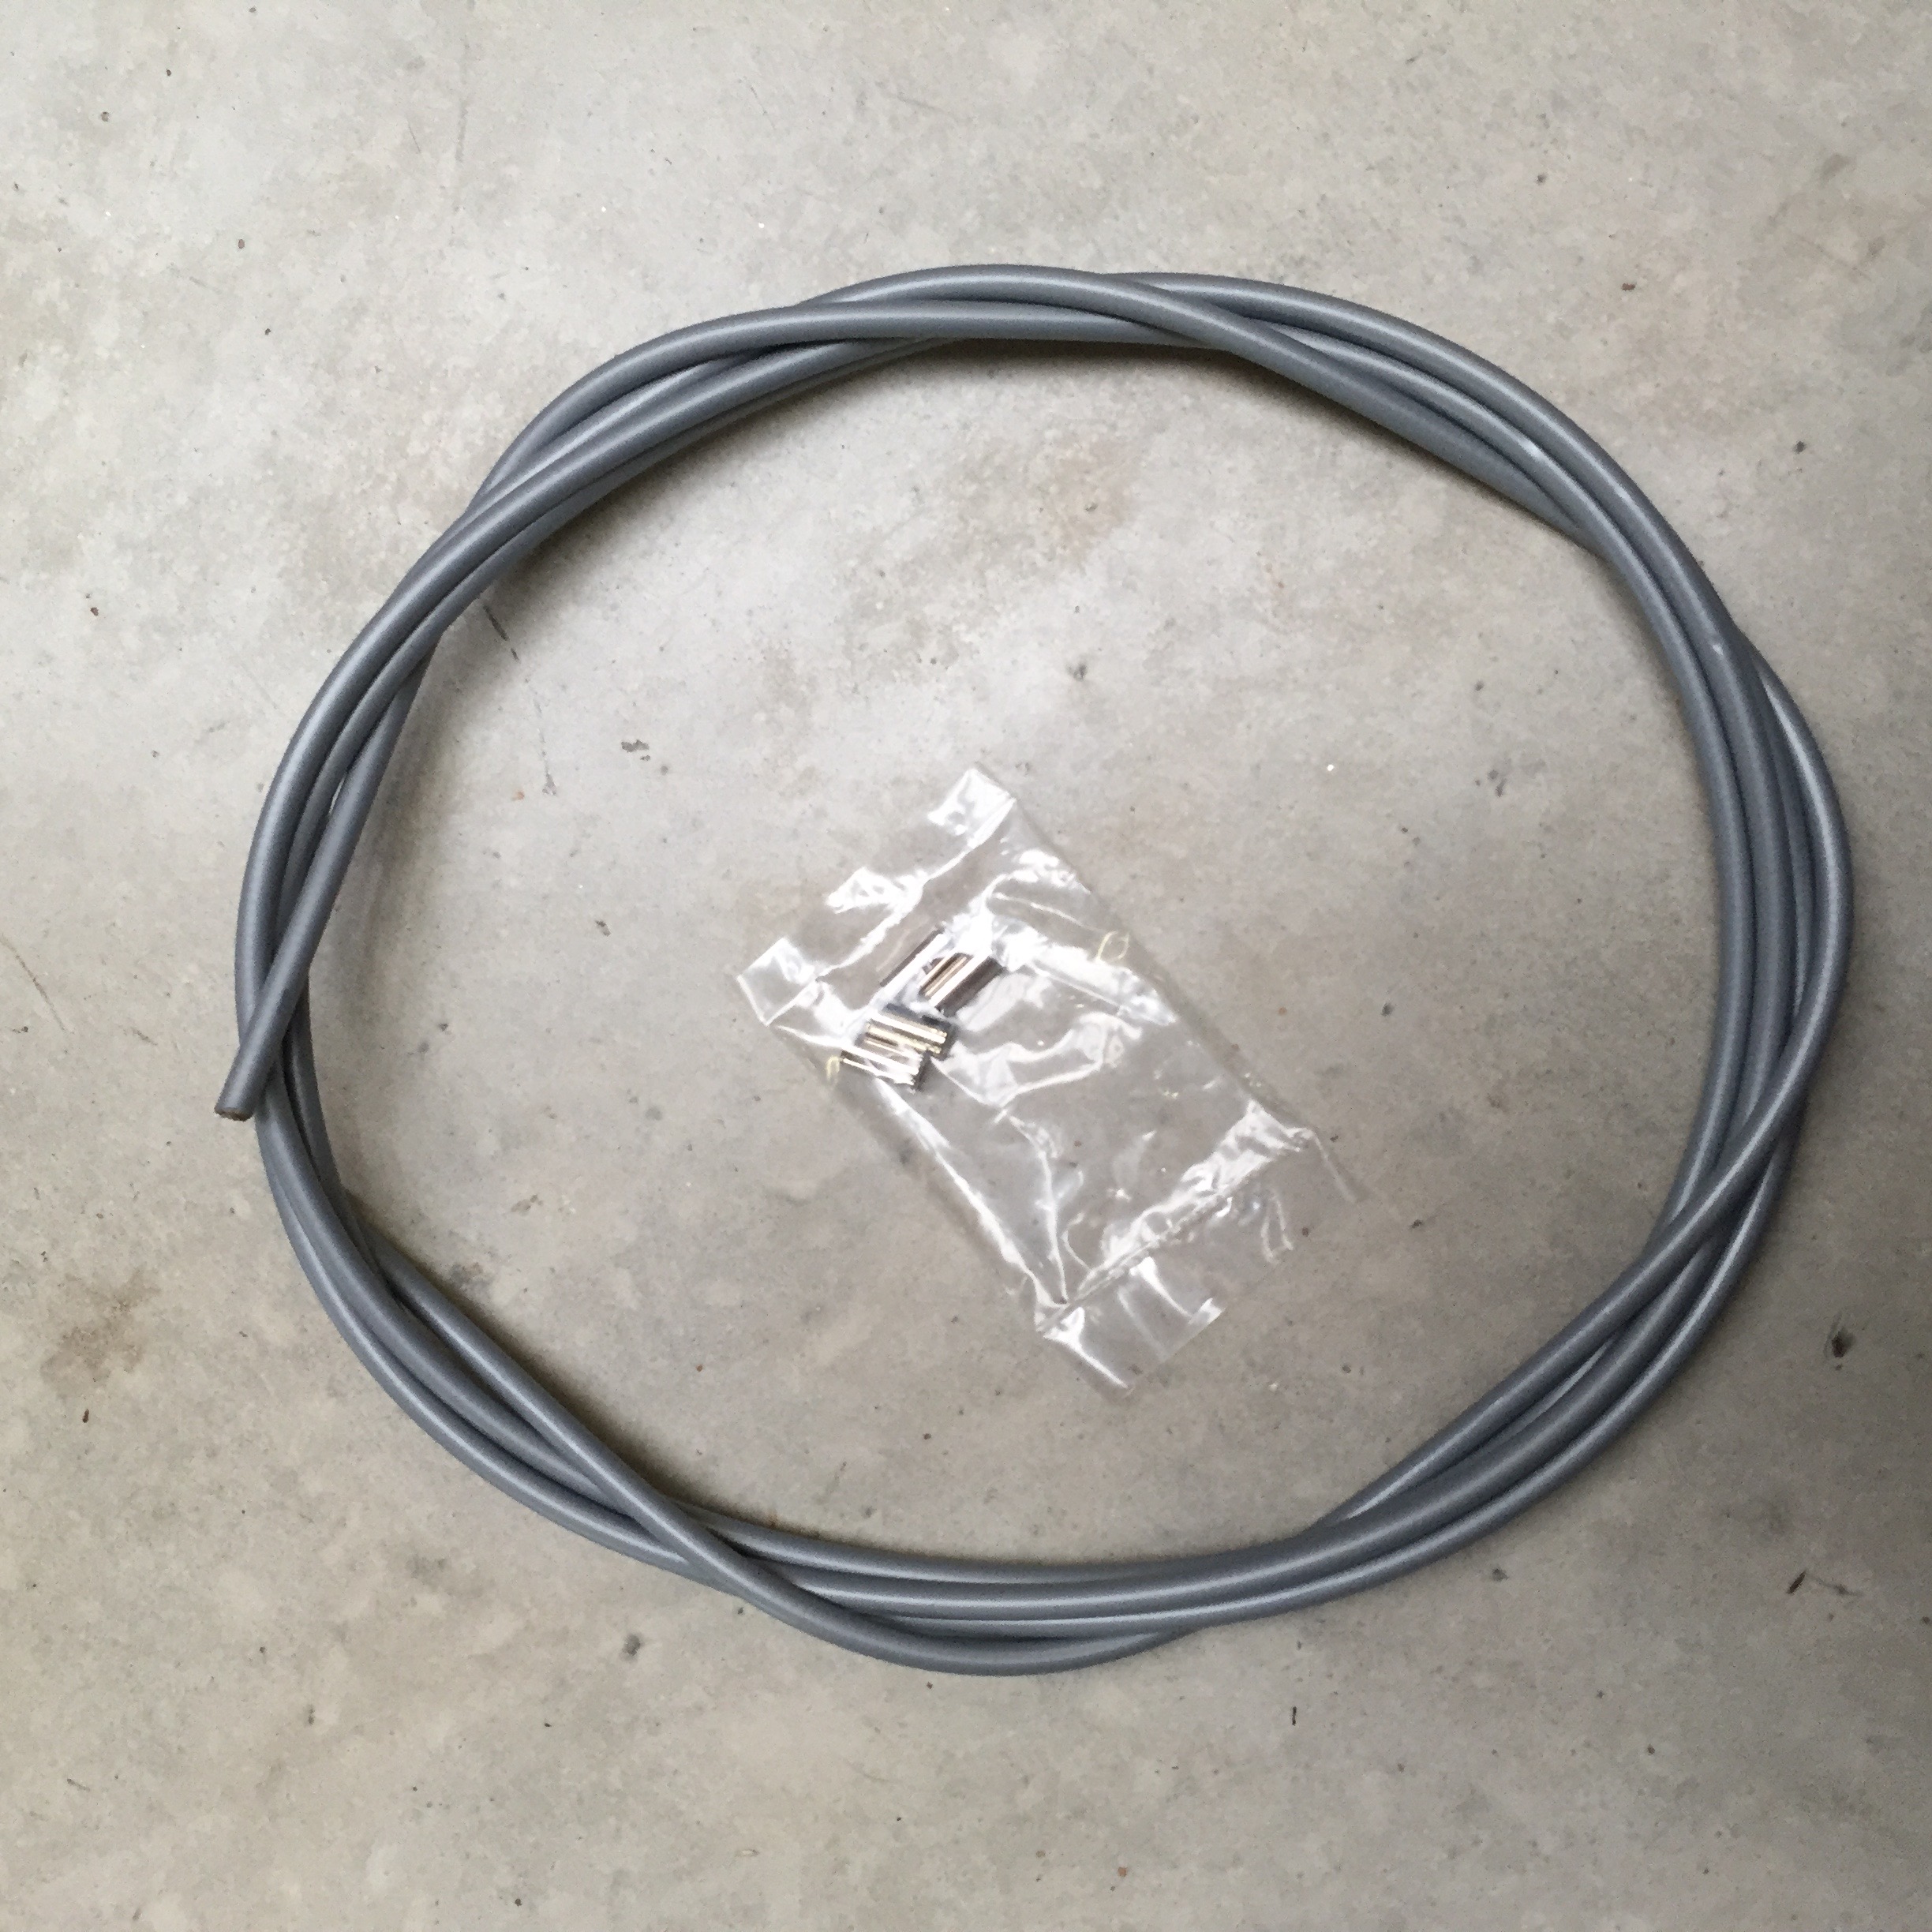 Outer Cable Housing Grey